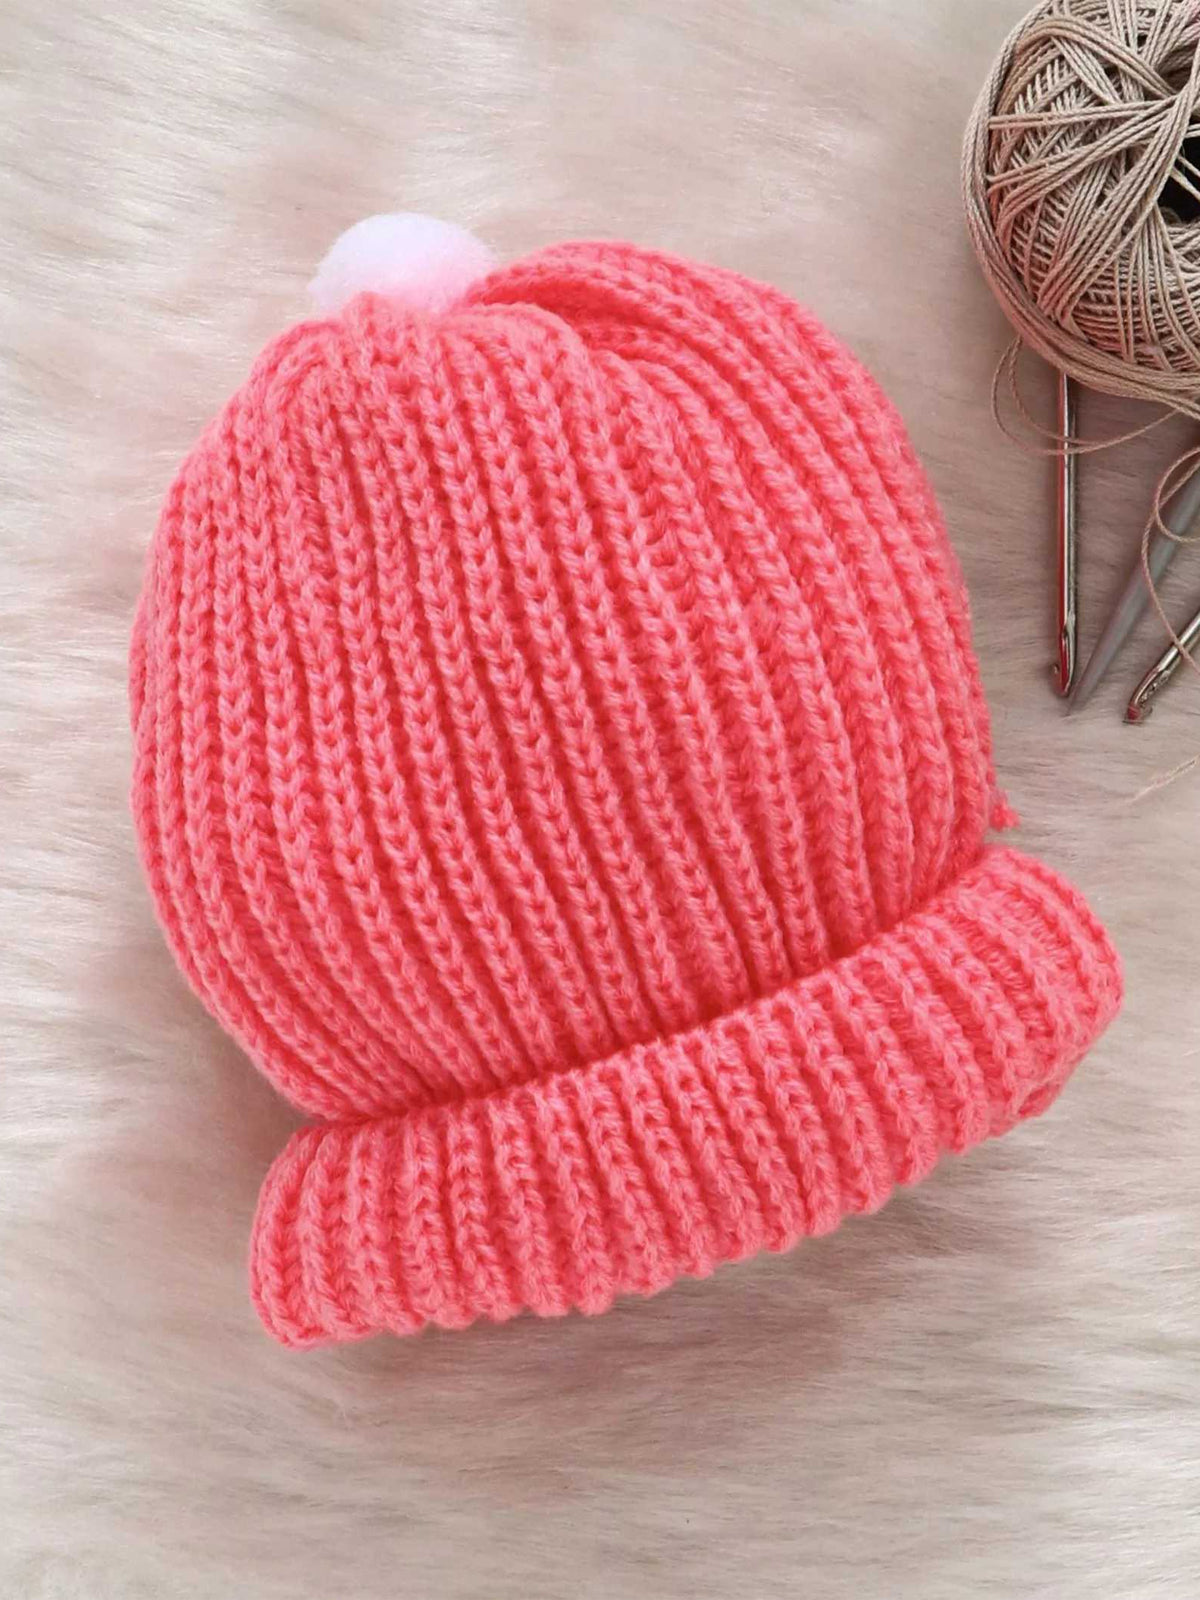 Soft and Comfortable Round Cap with Pom Pom for baby - Neon Pink color